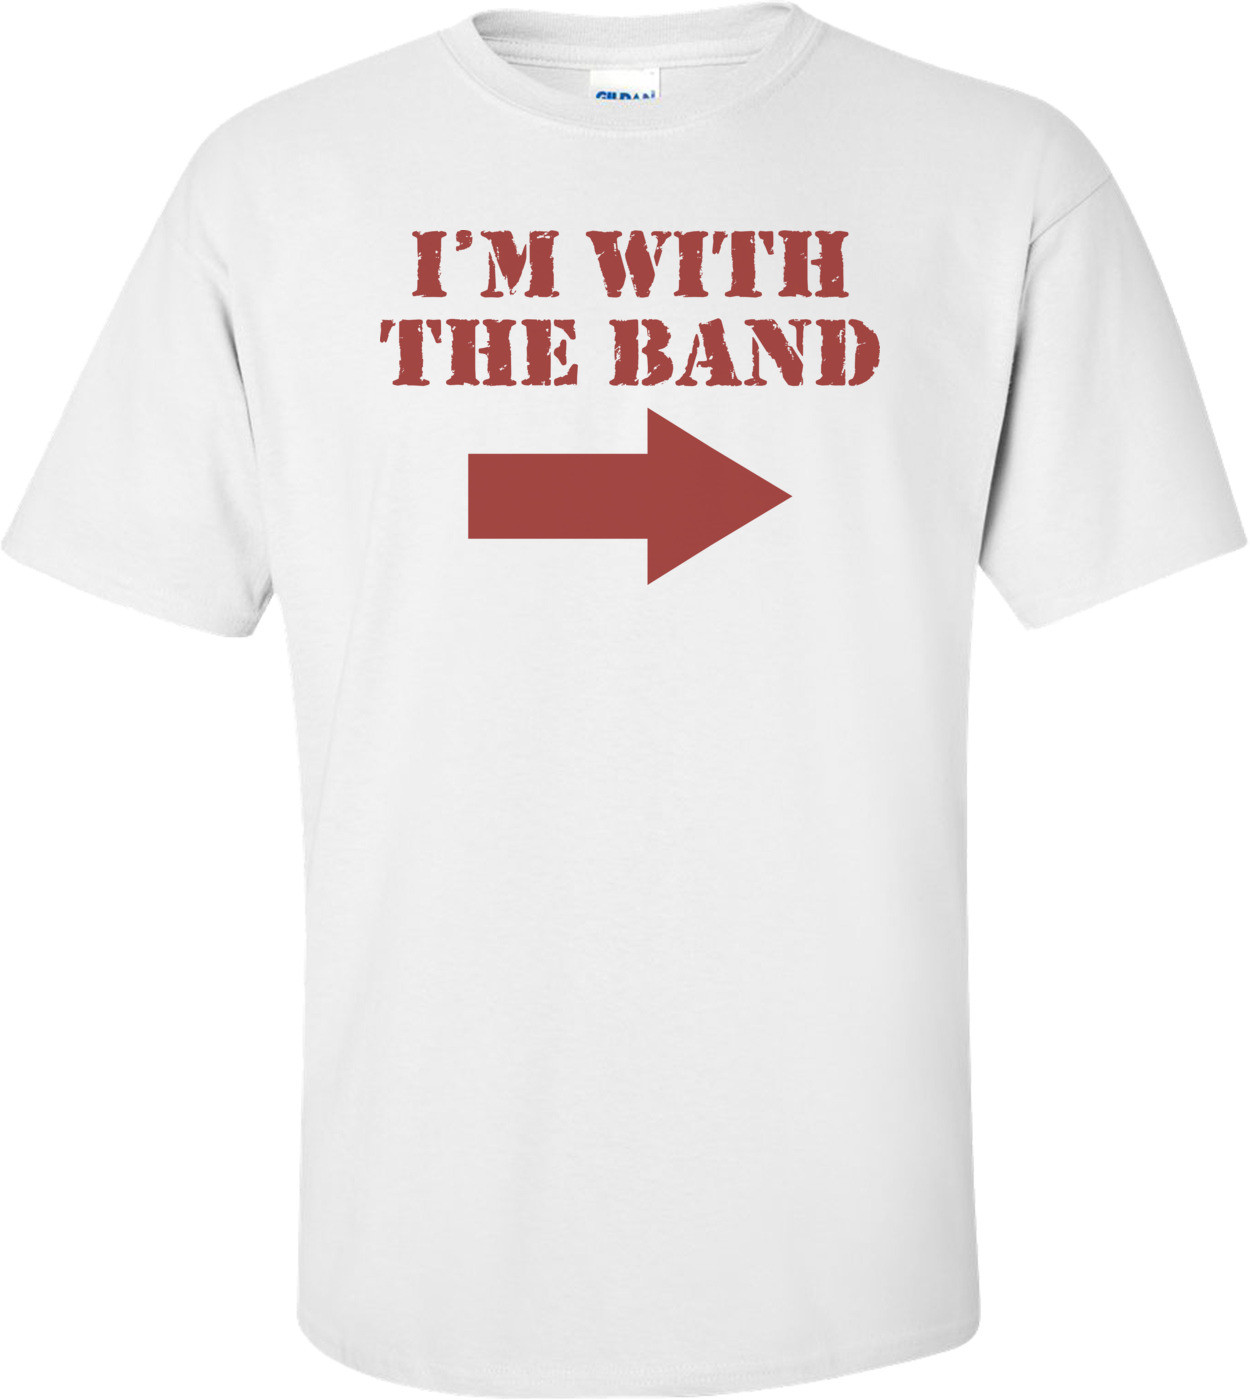 I'm With The Band T-shirt